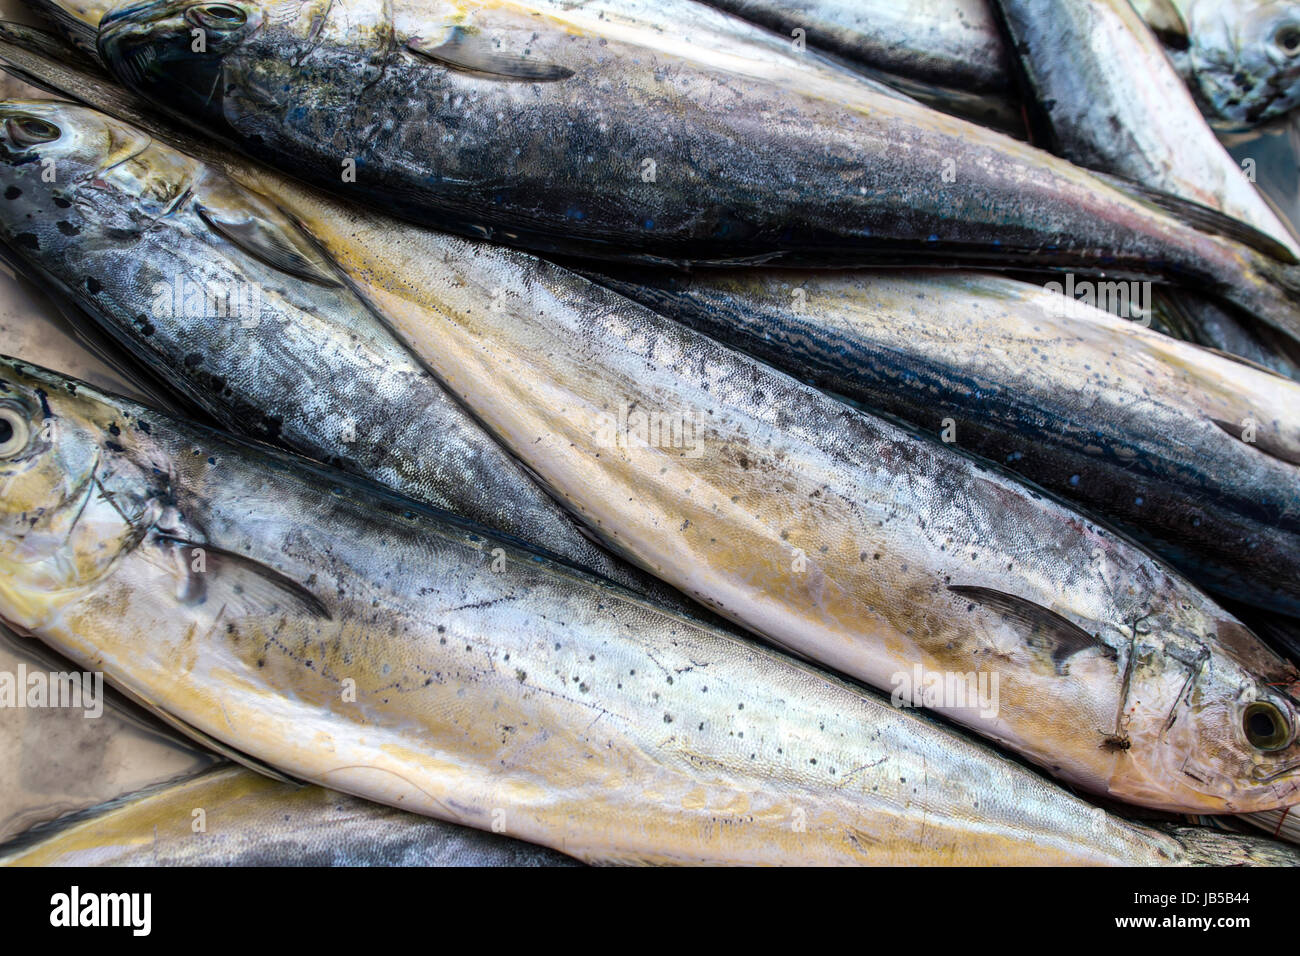 Fresh fish in a market Stock Photo